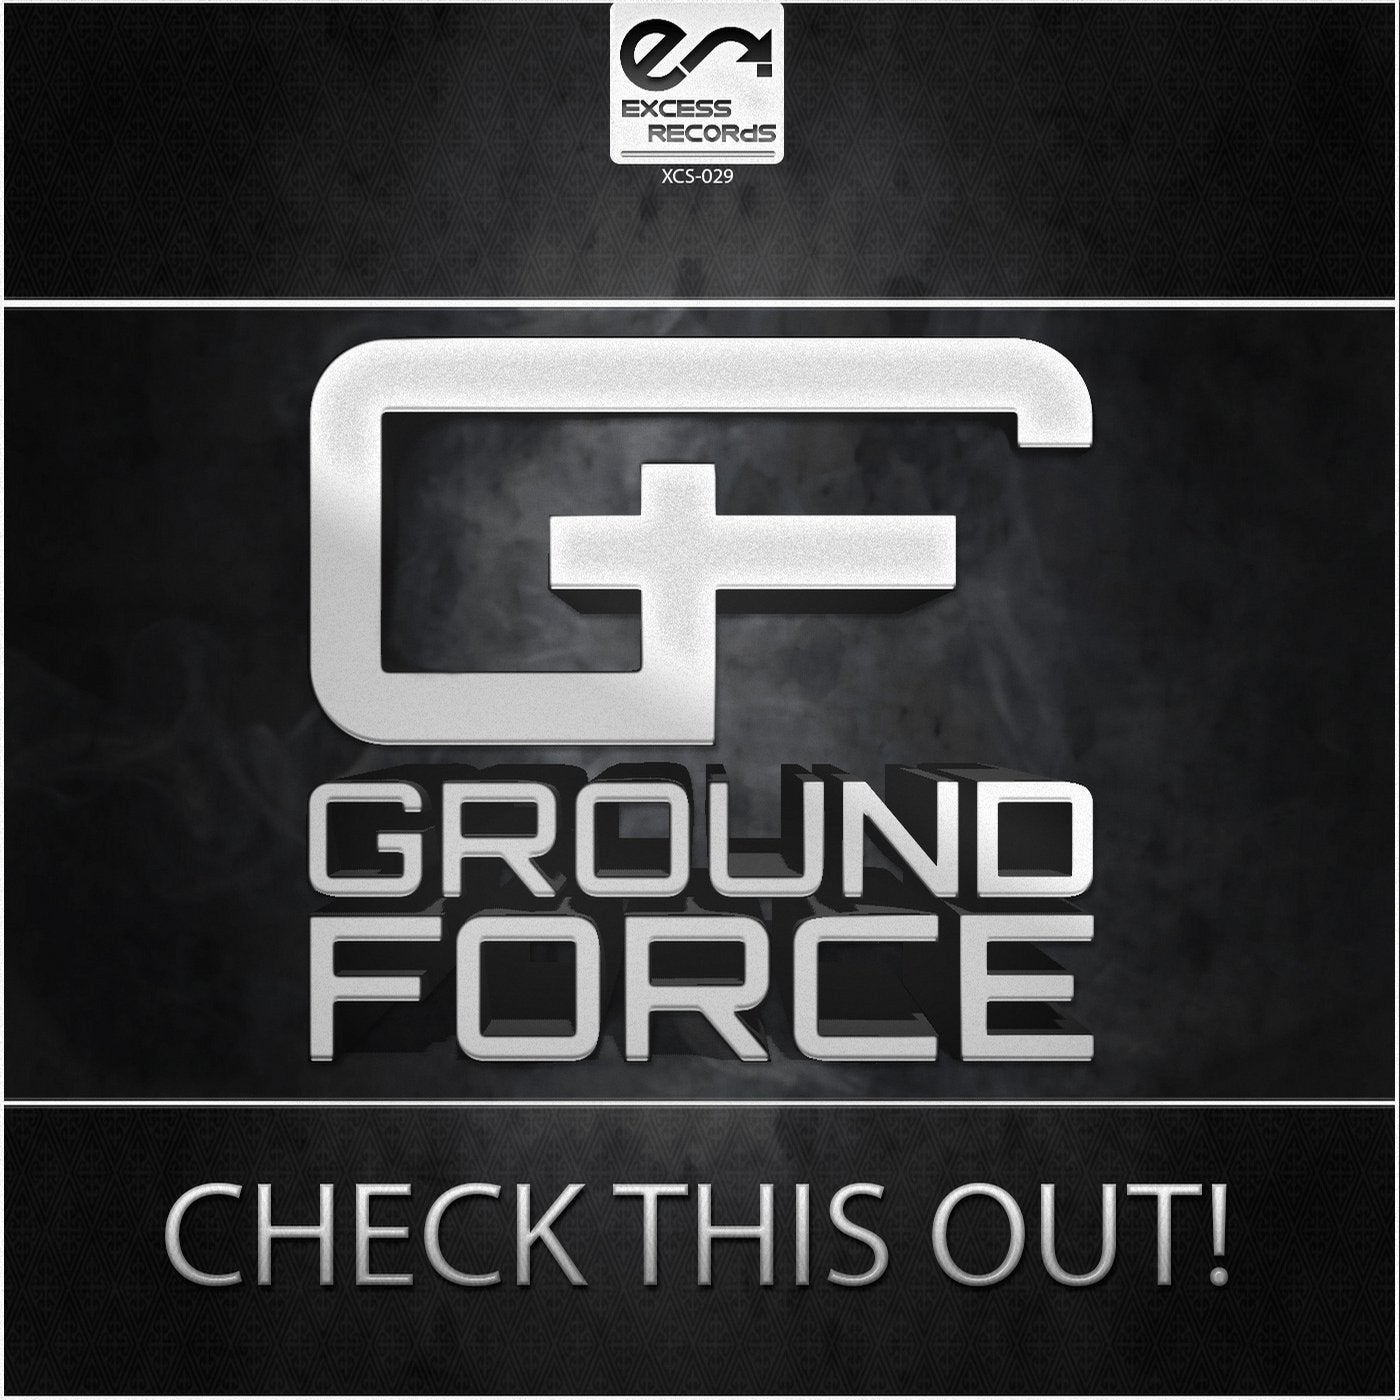 Cross out the excess. Check this out песня. Special ground Force. Special ground Force на компьютер. Back to the ground.